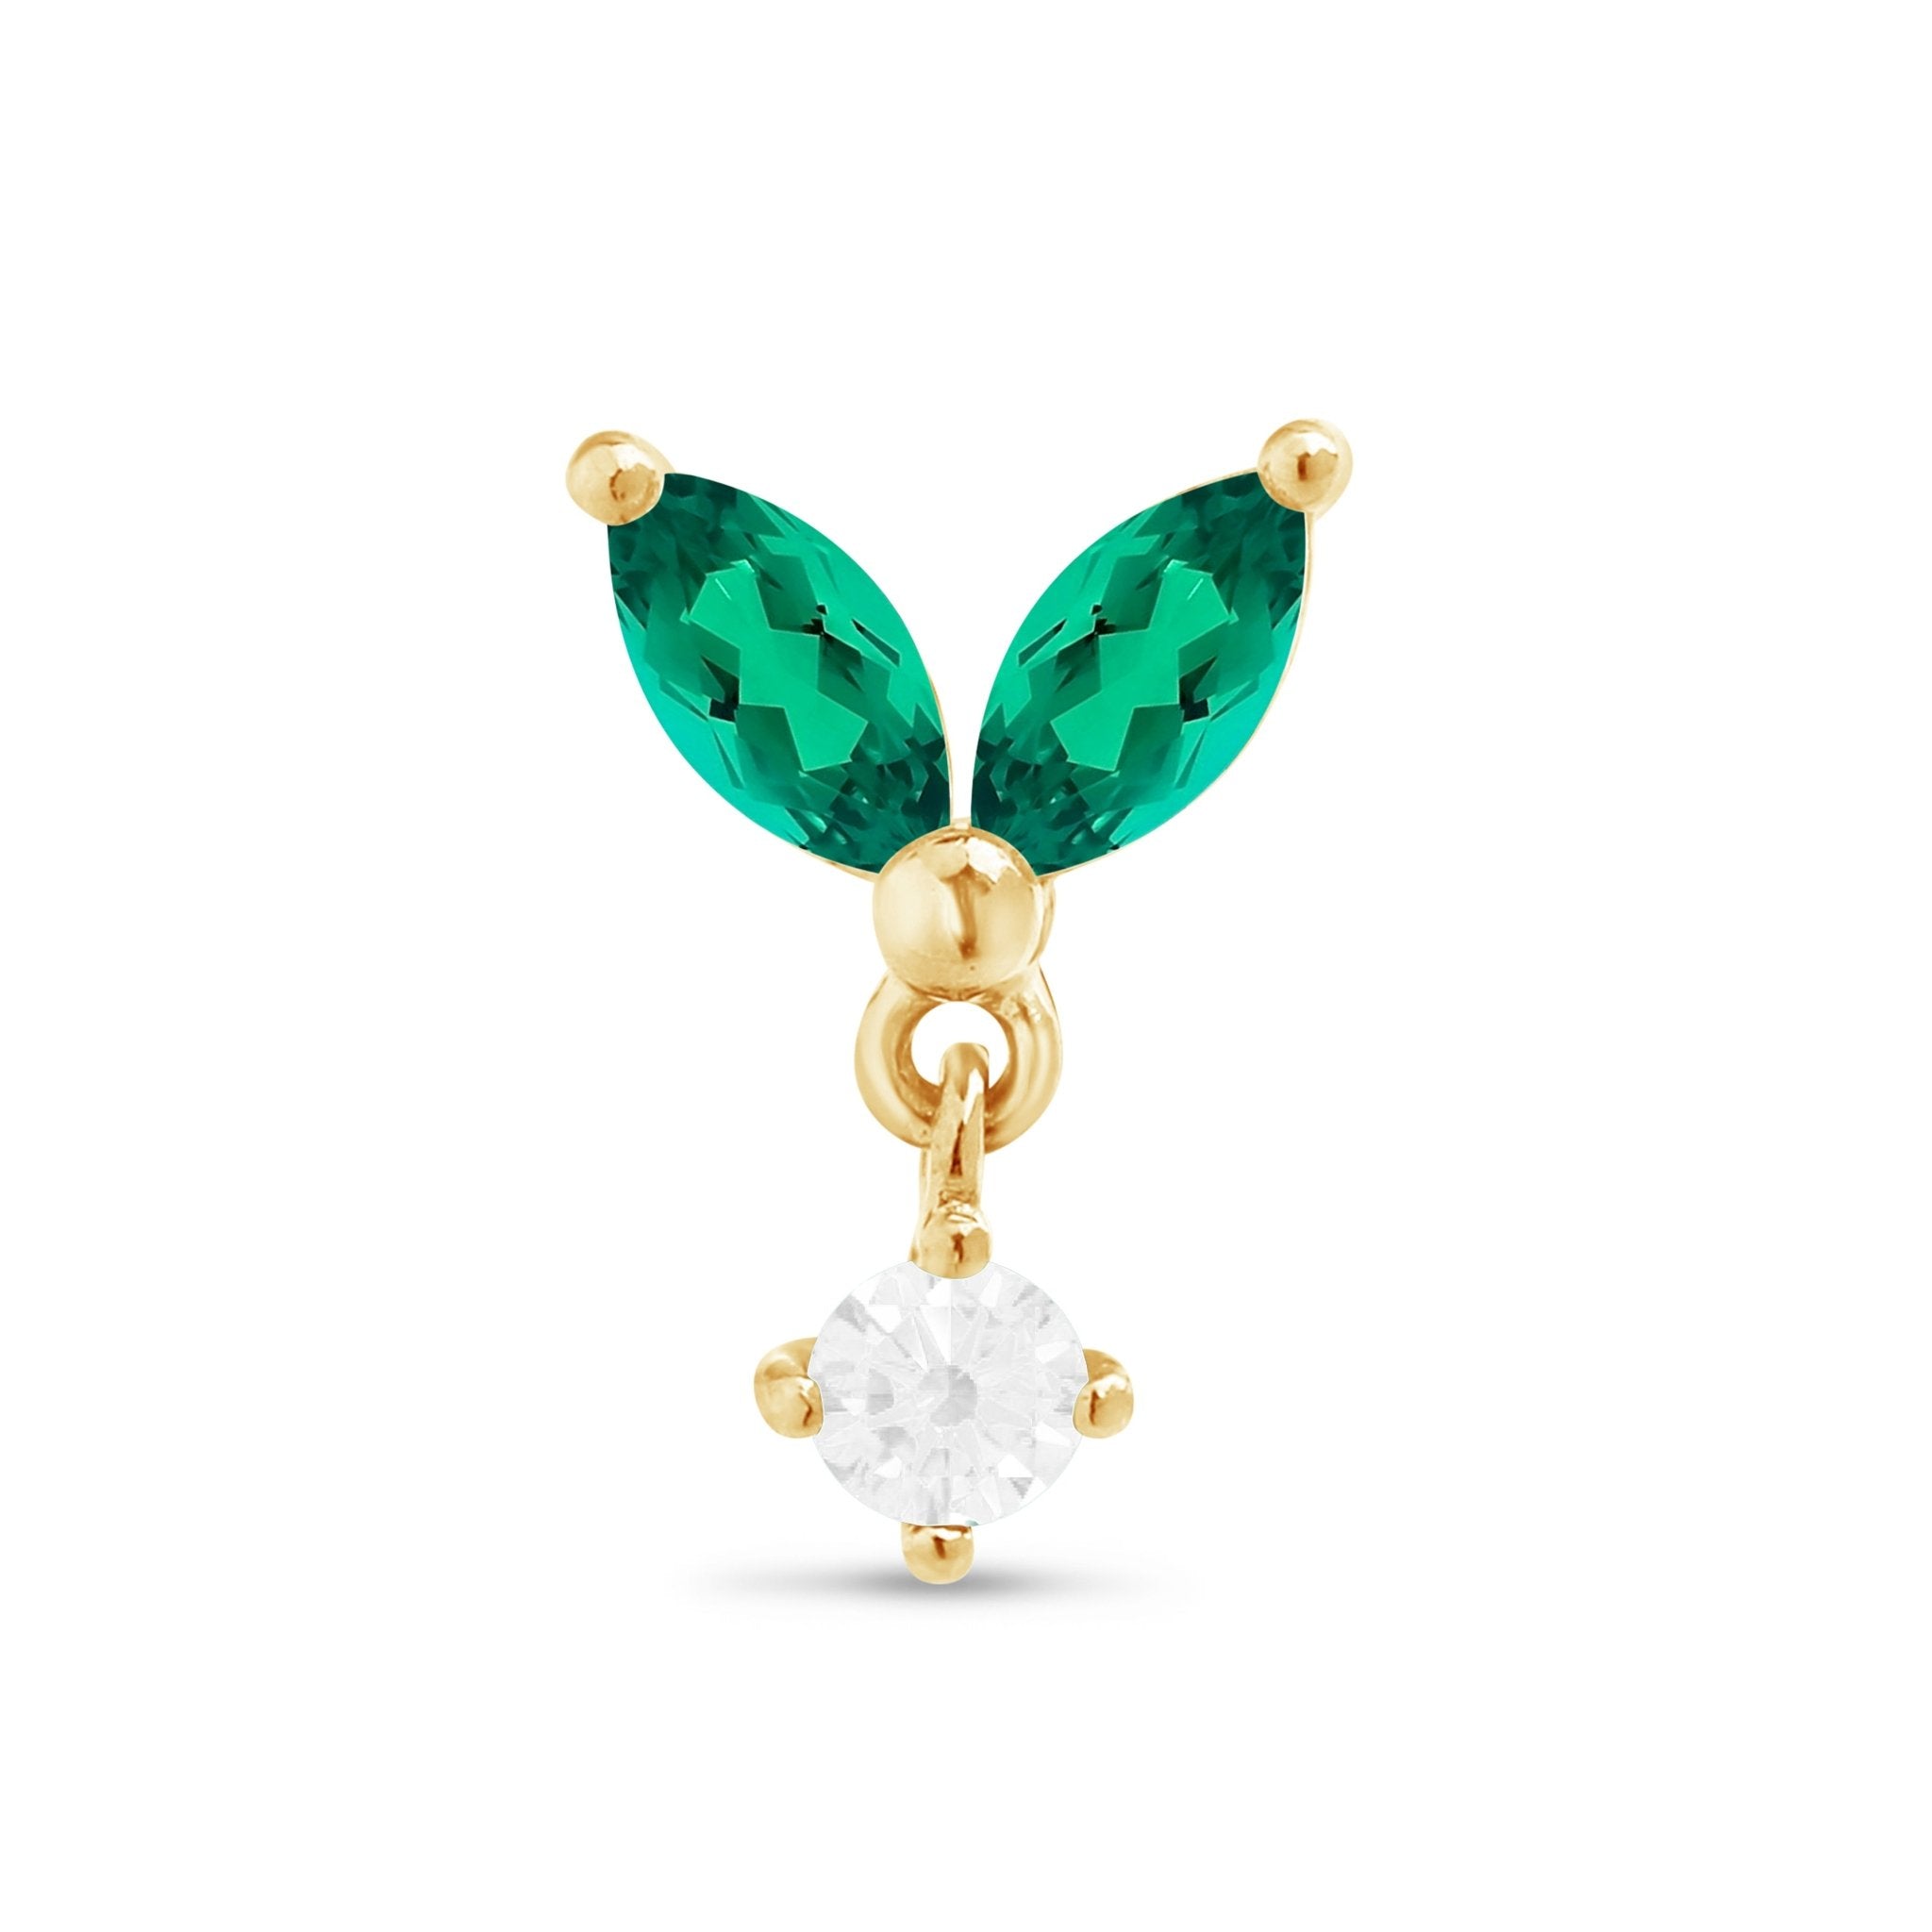 Emerald Double Marquise Drop Earrings Estella Collection #product_description# 18578 new New Arrivals test test mechanic #tag4# #tag5# #tag6# #tag7# #tag8# #tag9# #tag10#